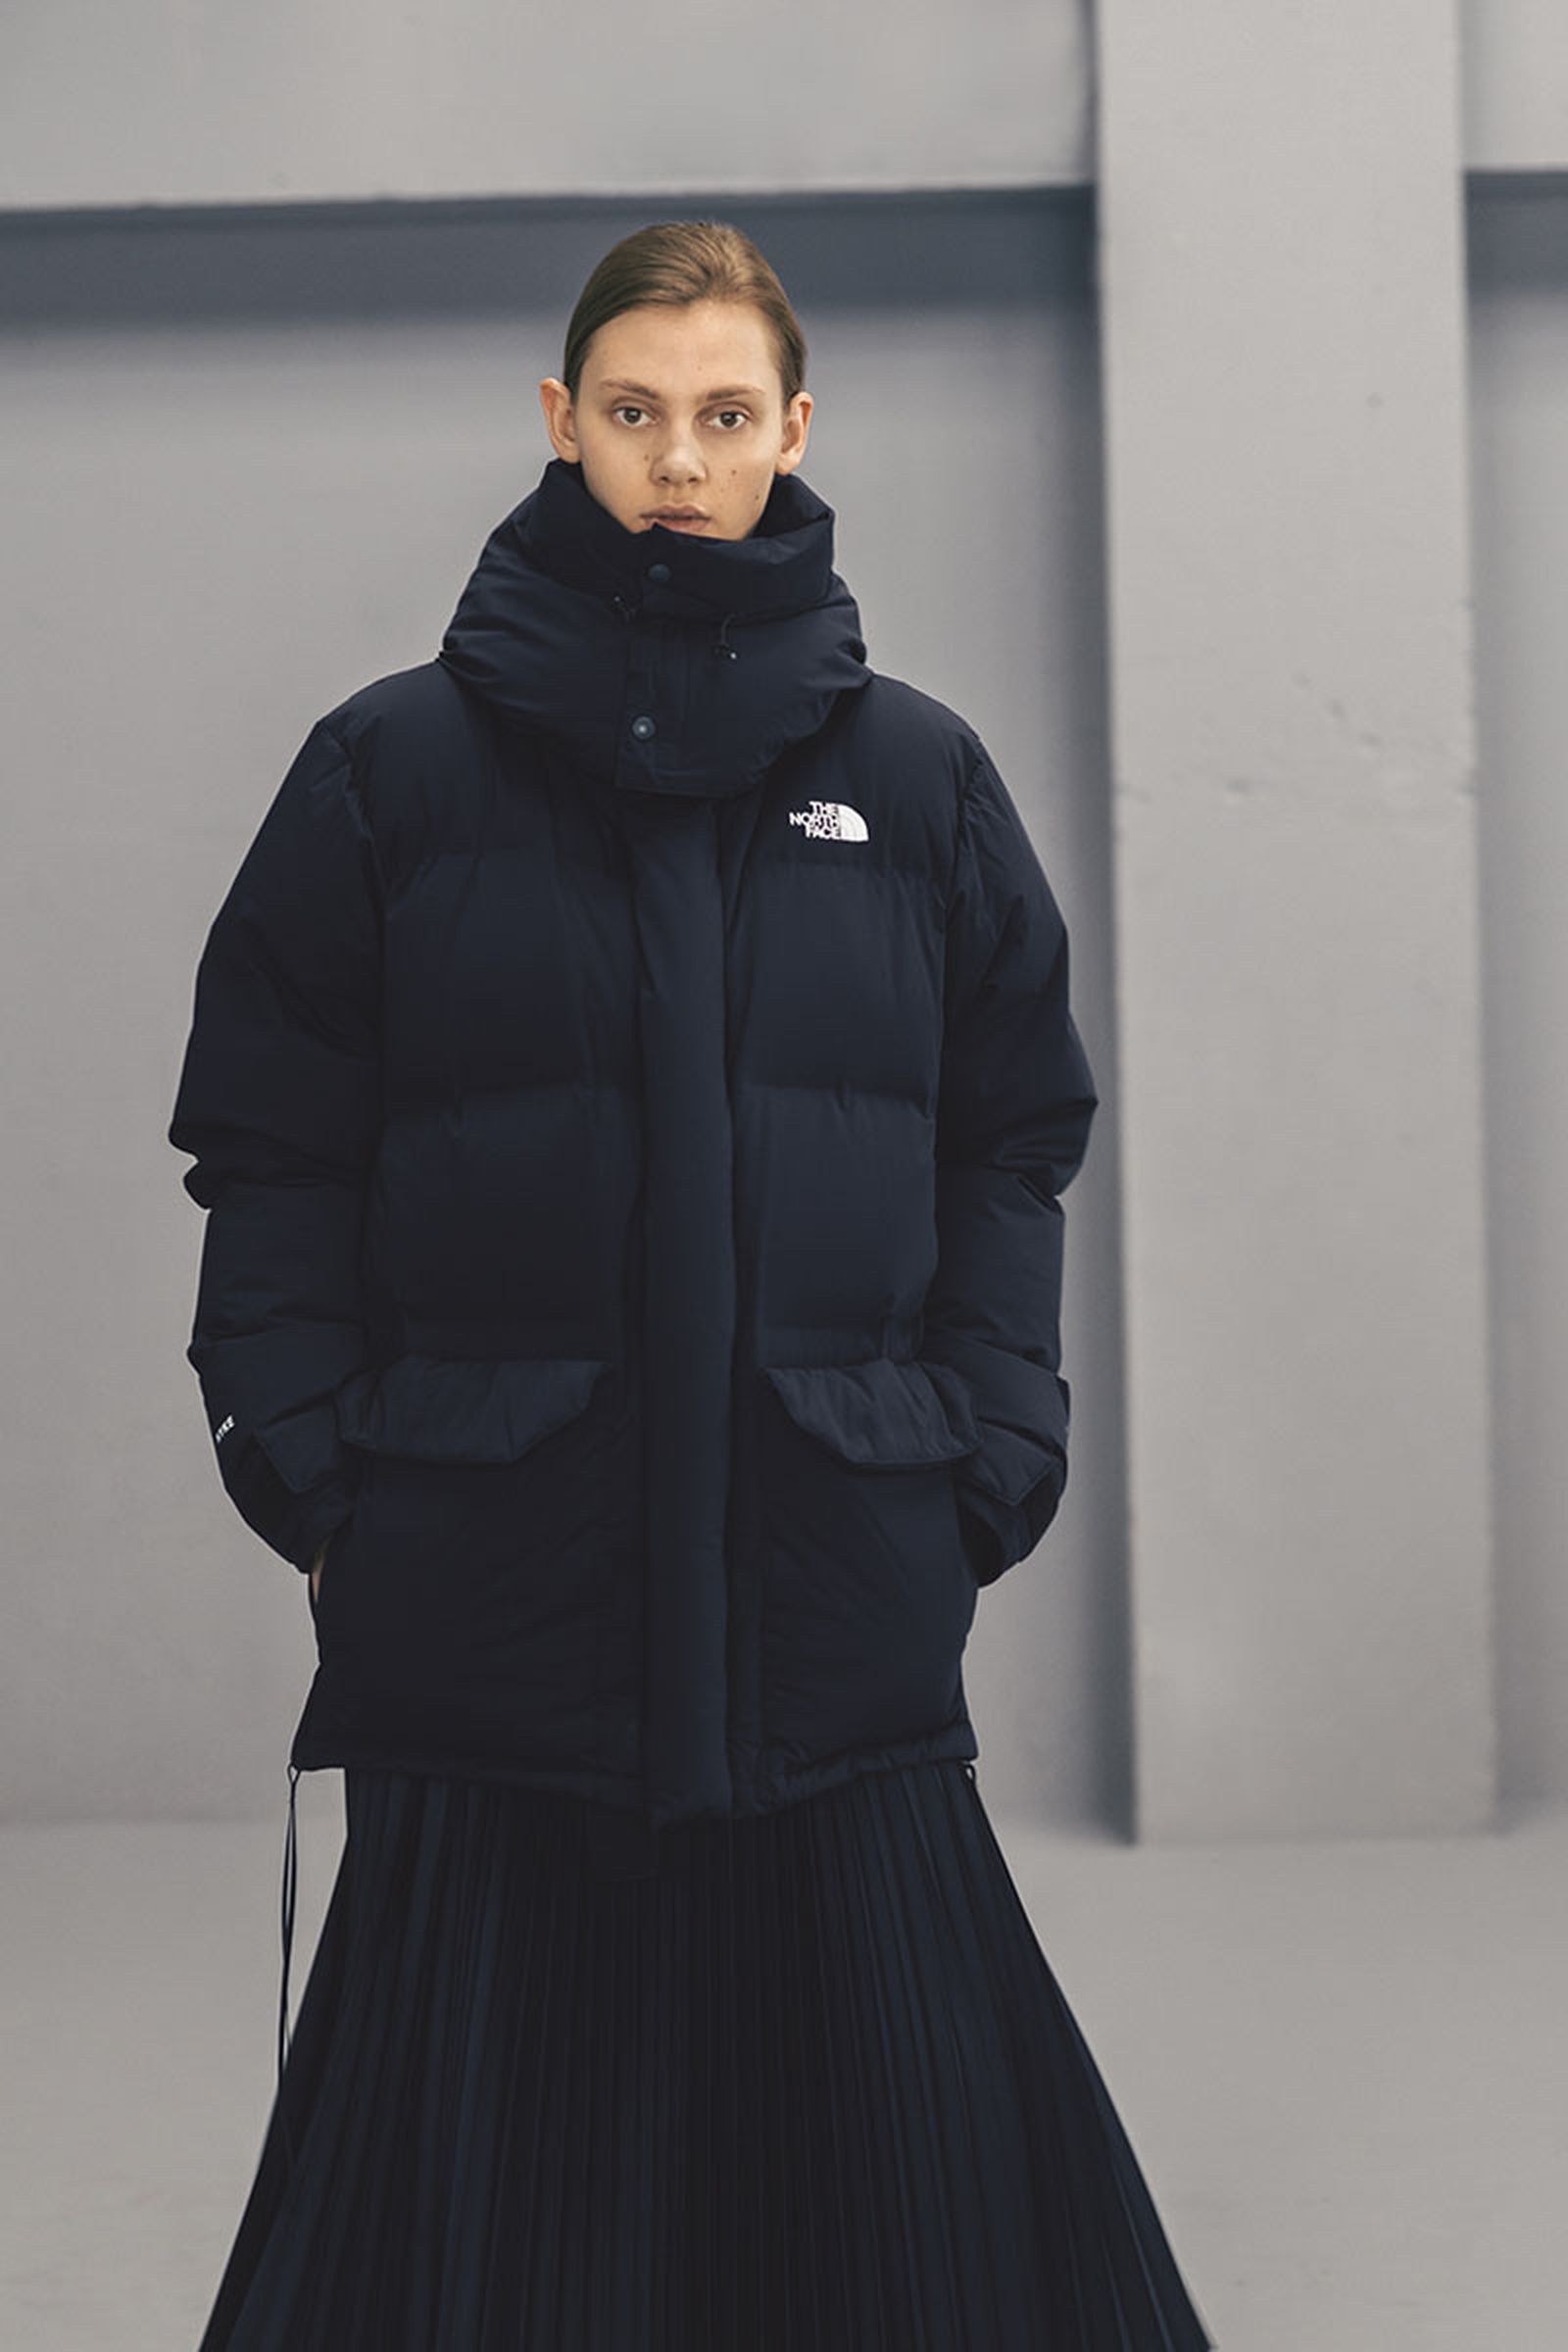 The North Face & HYKE Go Full-Force of Winter Ready Garments